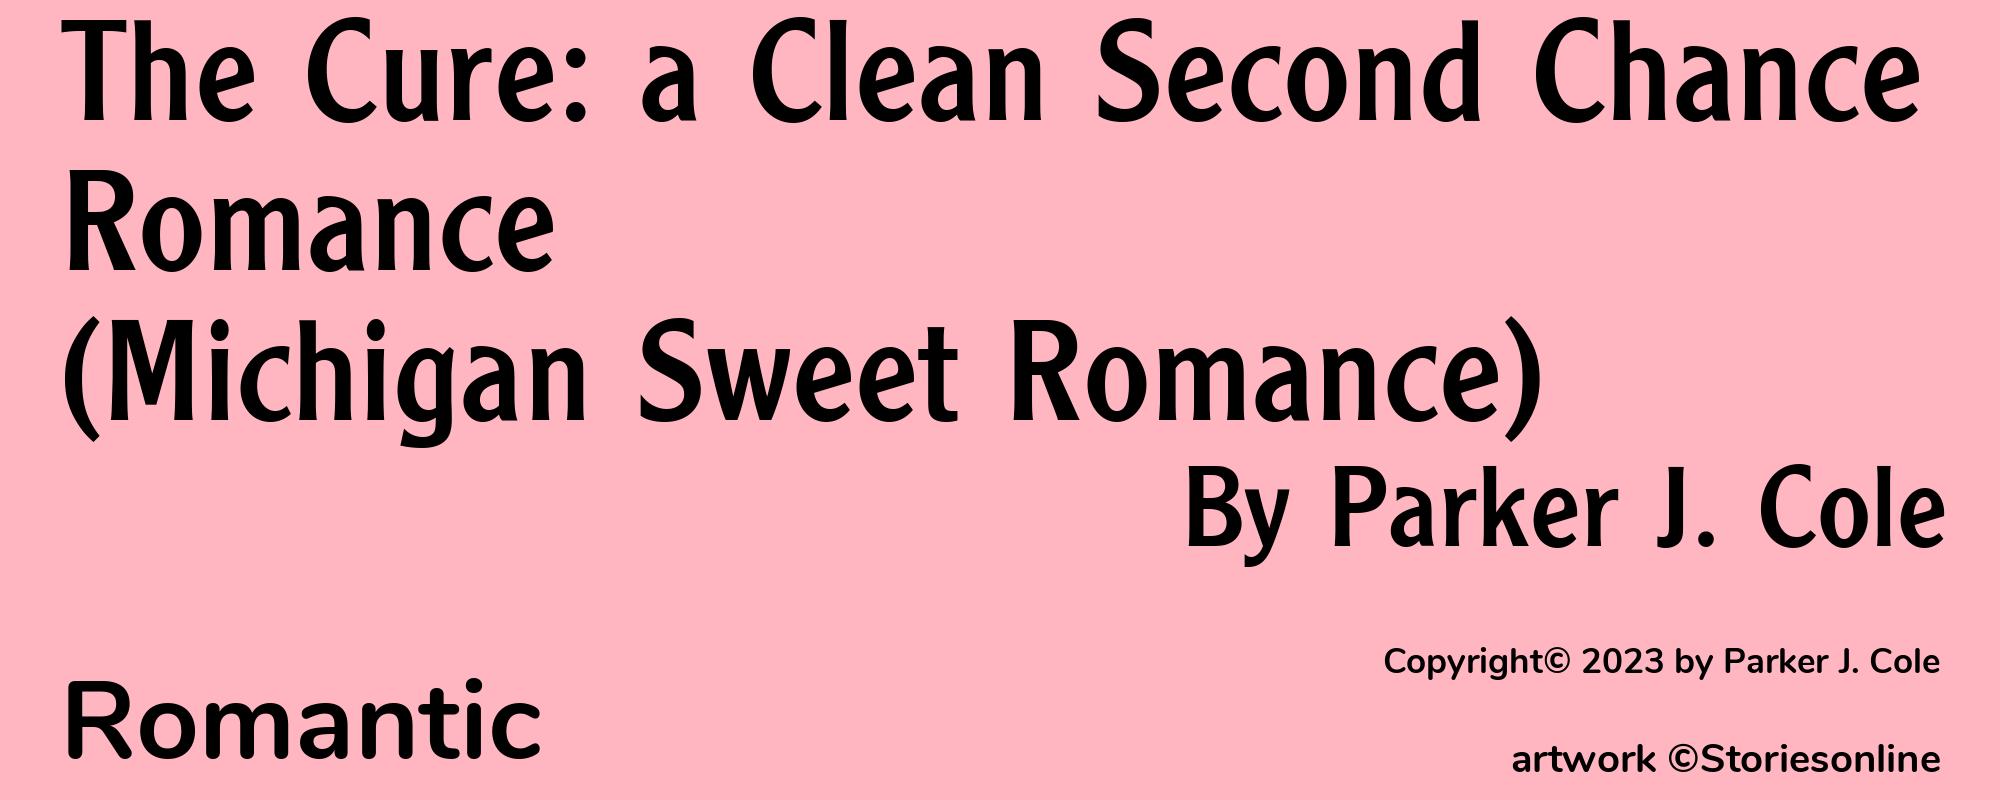 The Cure: a Clean Second Chance Romance (Michigan Sweet Romance) - Cover